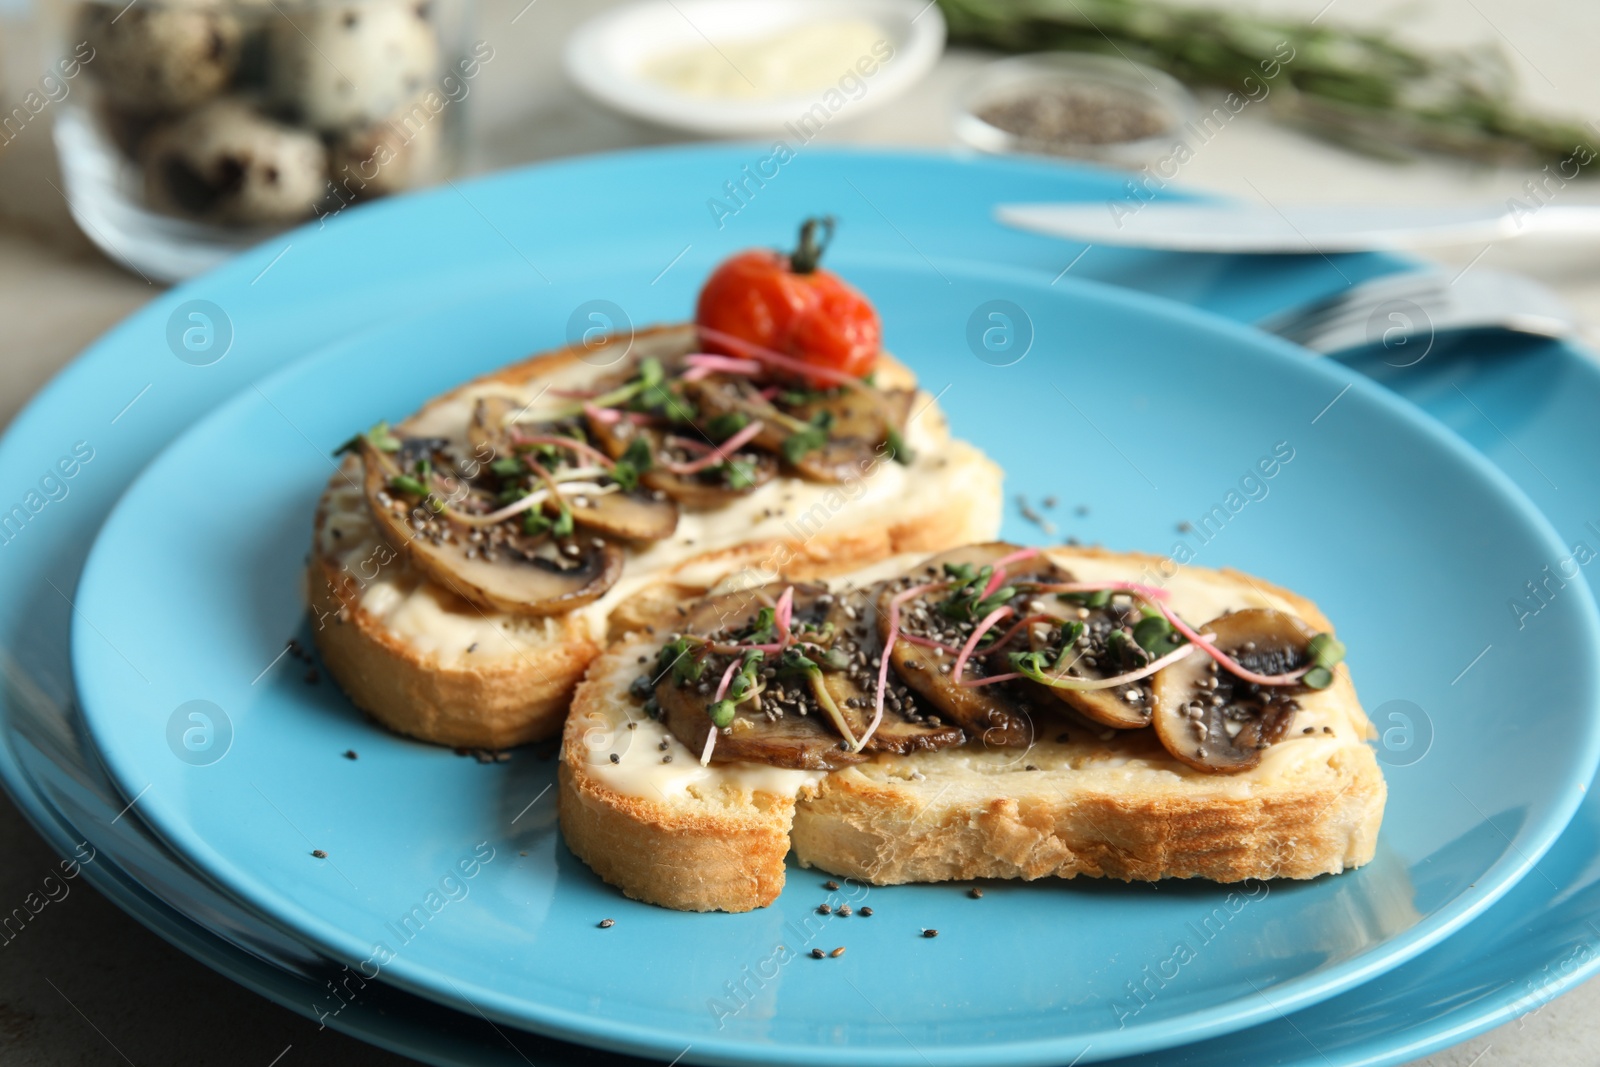 Photo of Tasty toasts with mushrooms, sprouts and chia seeds on plate